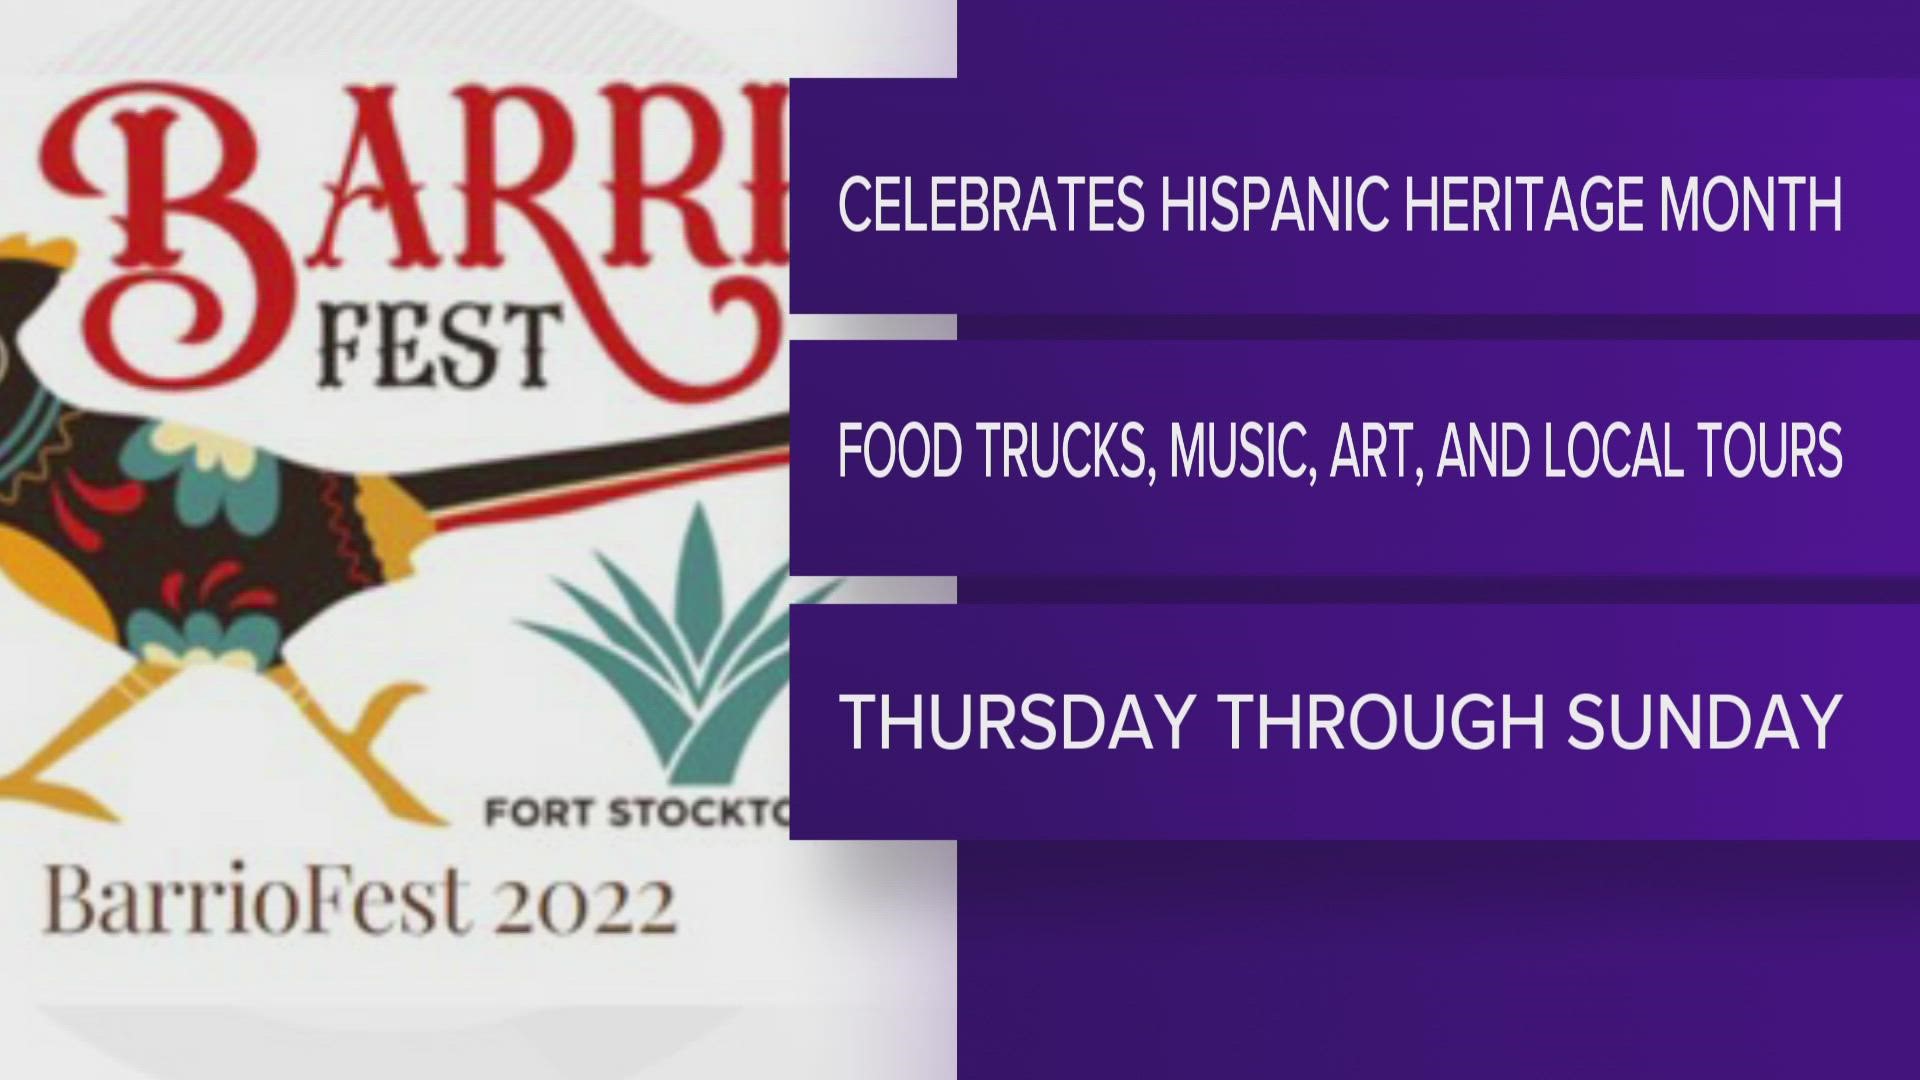 This will take place from Sept. 15-18 and celebrate the Hispanic traditions in Fort Stockton.